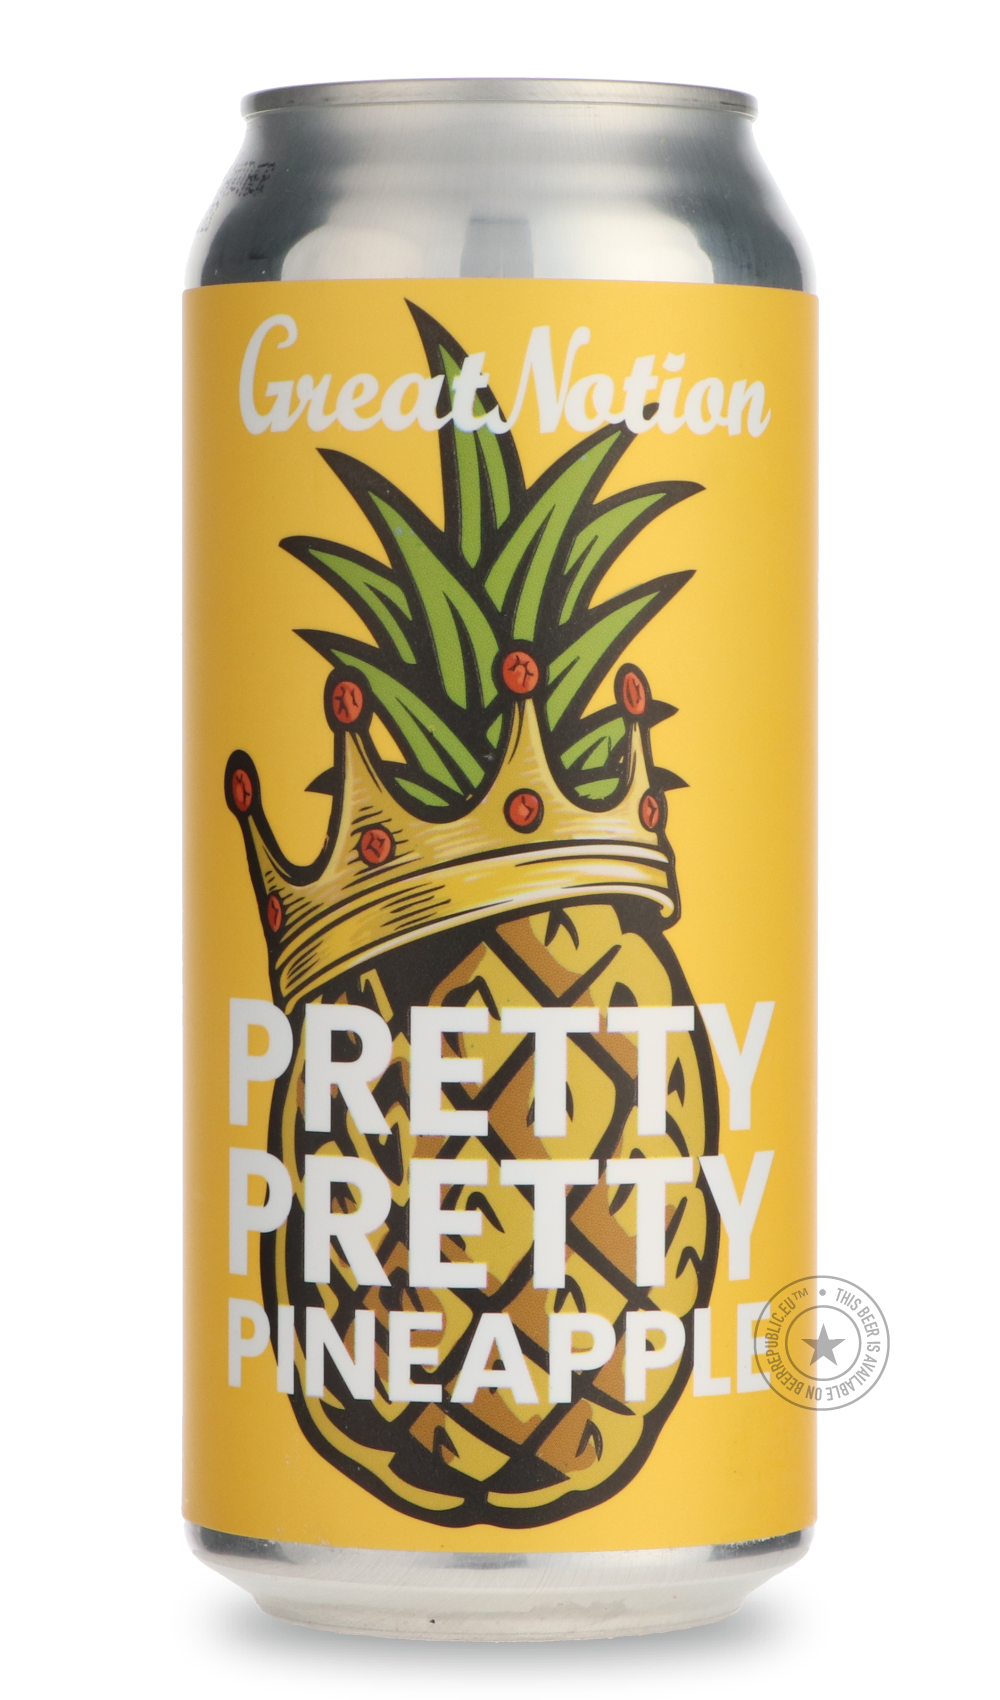 -Great Notion- Pretty Pretty Pineapple-Sour / Wild & Fruity- Only @ Beer Republic - The best online beer store for American & Canadian craft beer - Buy beer online from the USA and Canada - Bier online kopen - Amerikaans bier kopen - Craft beer store - Craft beer kopen - Amerikanisch bier kaufen - Bier online kaufen - Acheter biere online - IPA - Stout - Porter - New England IPA - Hazy IPA - Imperial Stout - Barrel Aged - Barrel Aged Imperial Stout - Brown - Dark beer - Blond - Blonde - Pilsner - Lager - Wh